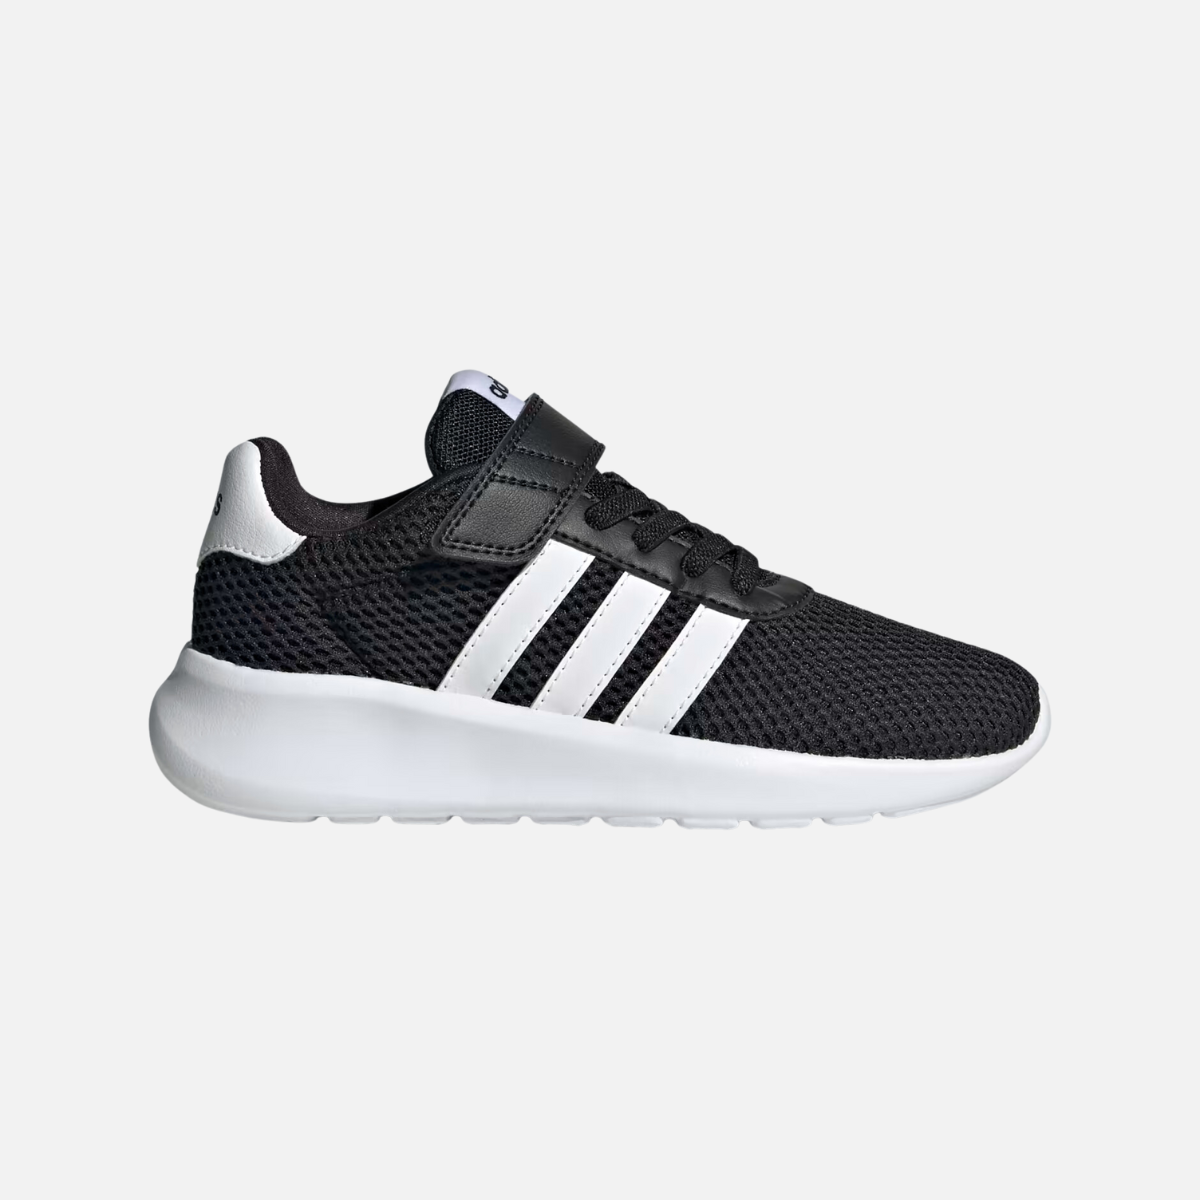 Adidas Lite Racer 3.0 Lifestyle Running Kids Unisex Shoes BOY AND GIRL (4-7 YEAR) -Core Black/Cloud White/Cloud White